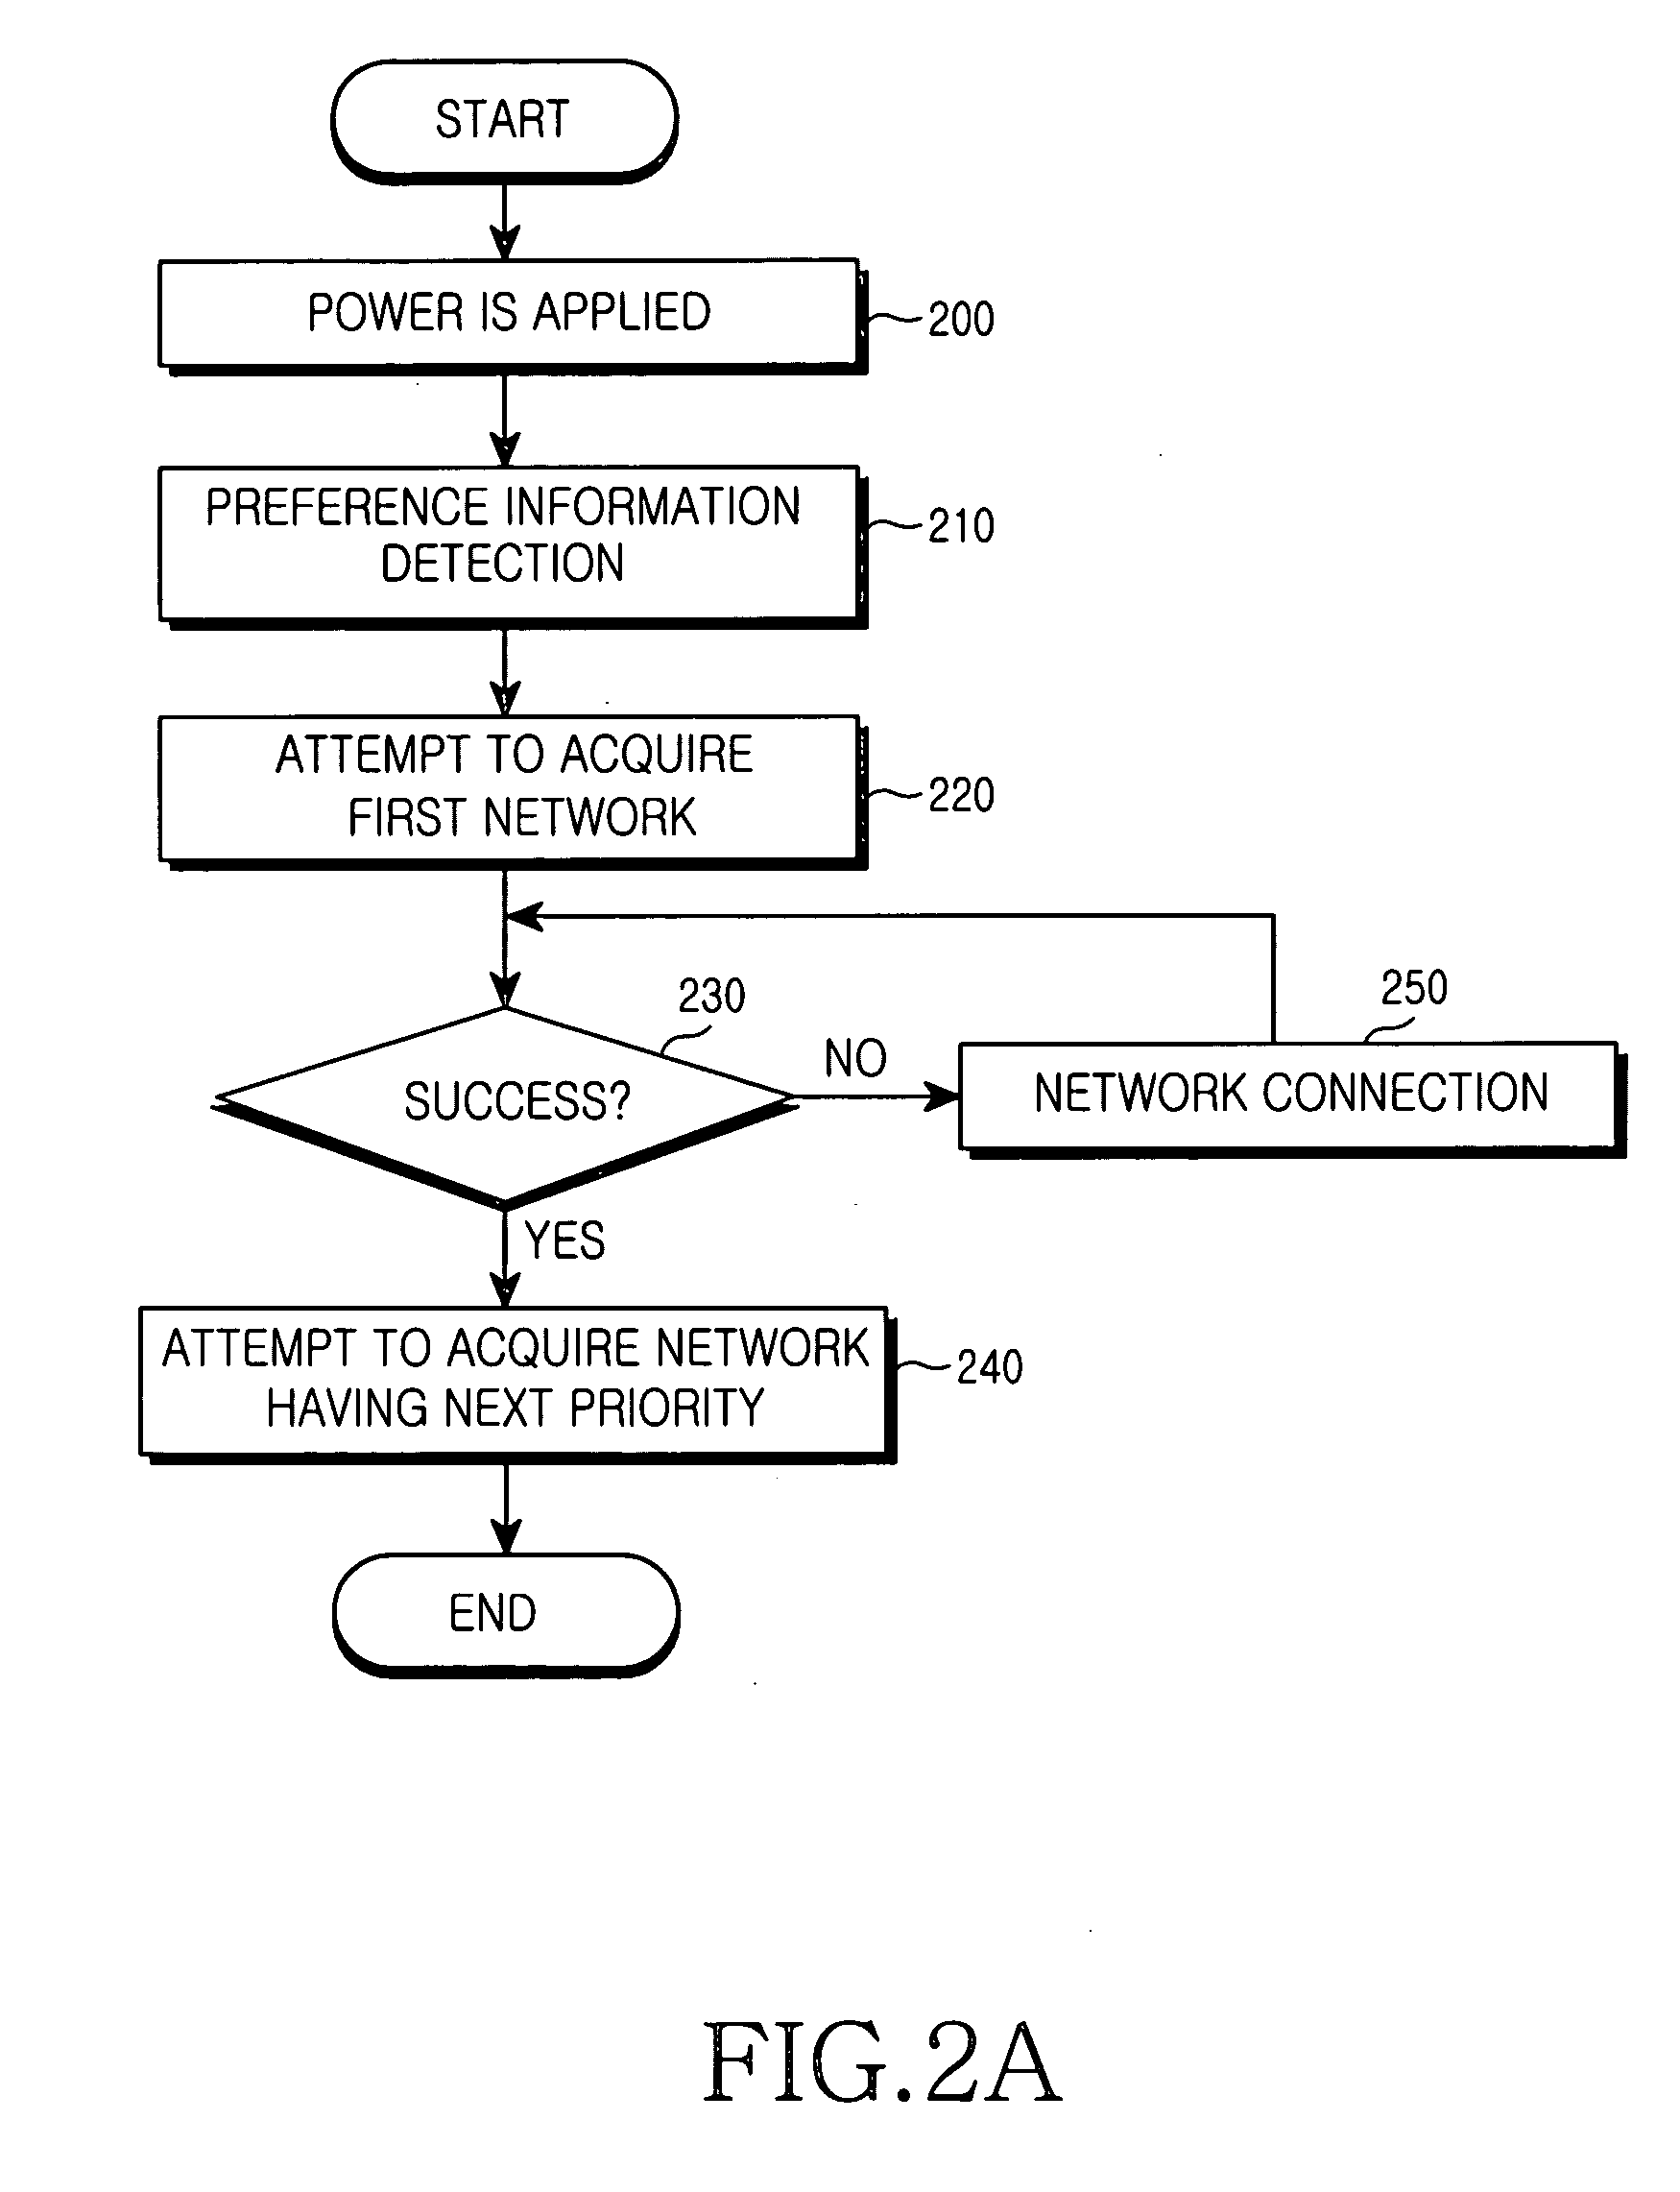 Access network selection apparatus and method in a heterogeneous system